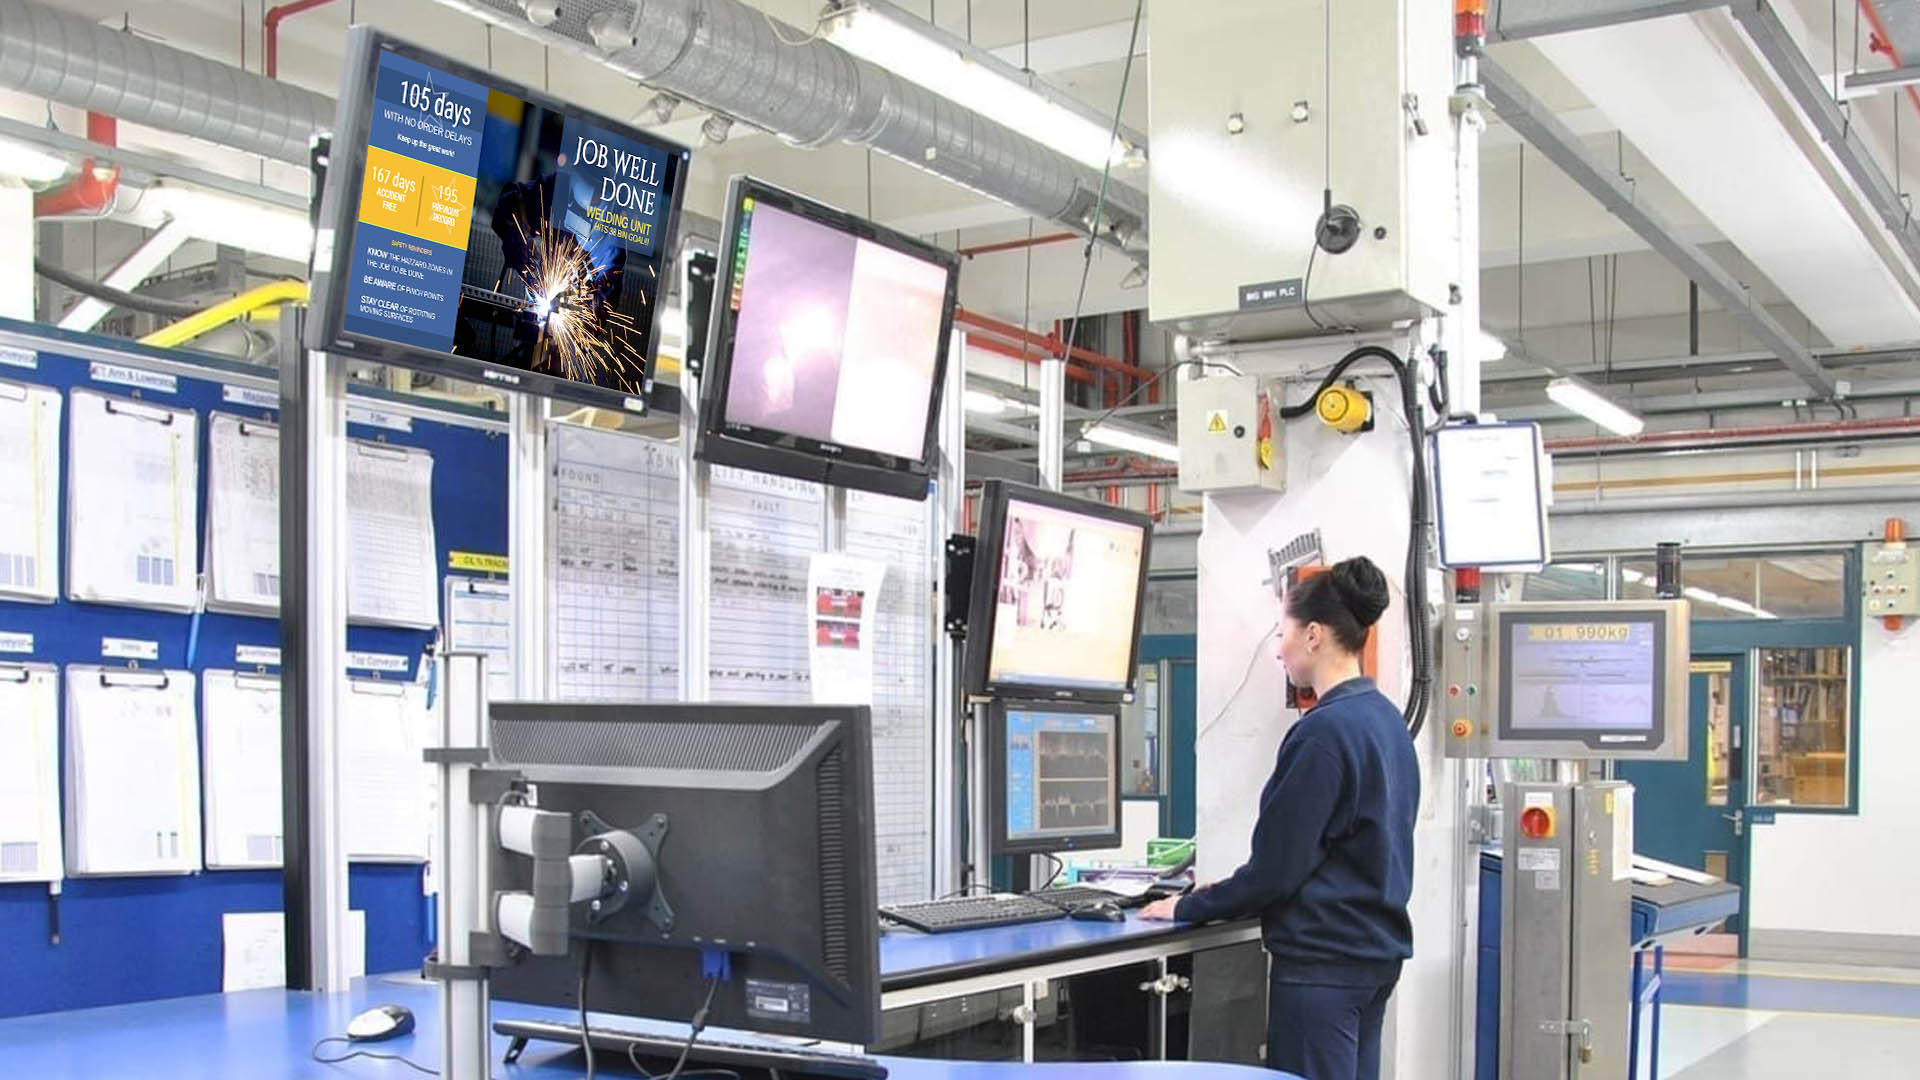 Arreya Digital Signage plays in a manufacturing work station for employee work related numbers and goals